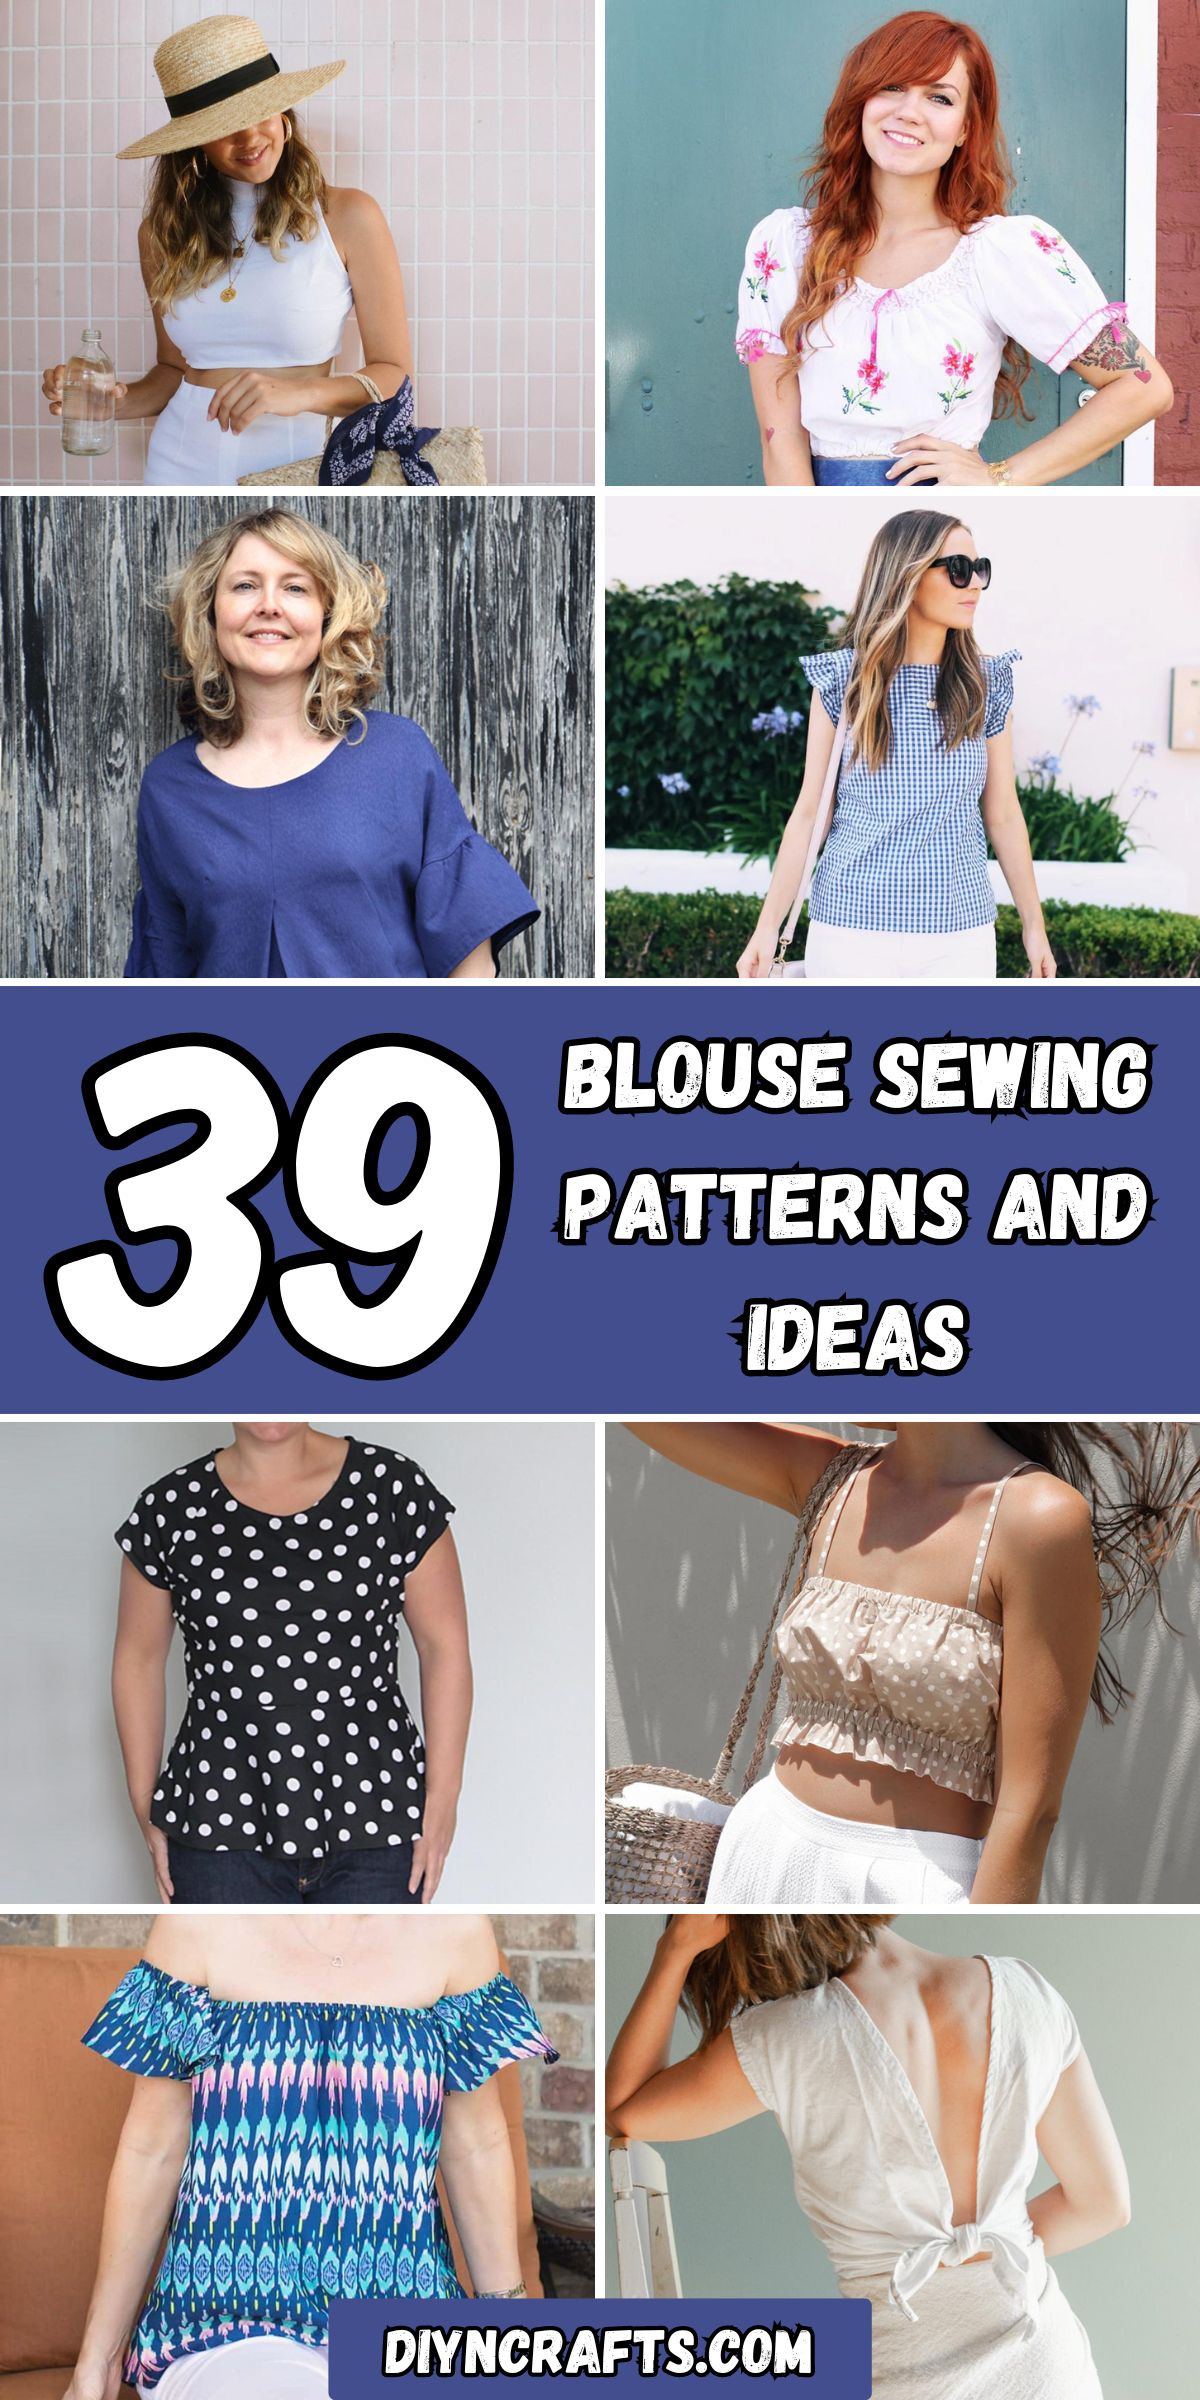 39 Blouse Sewing Patterns and Ideas collage.